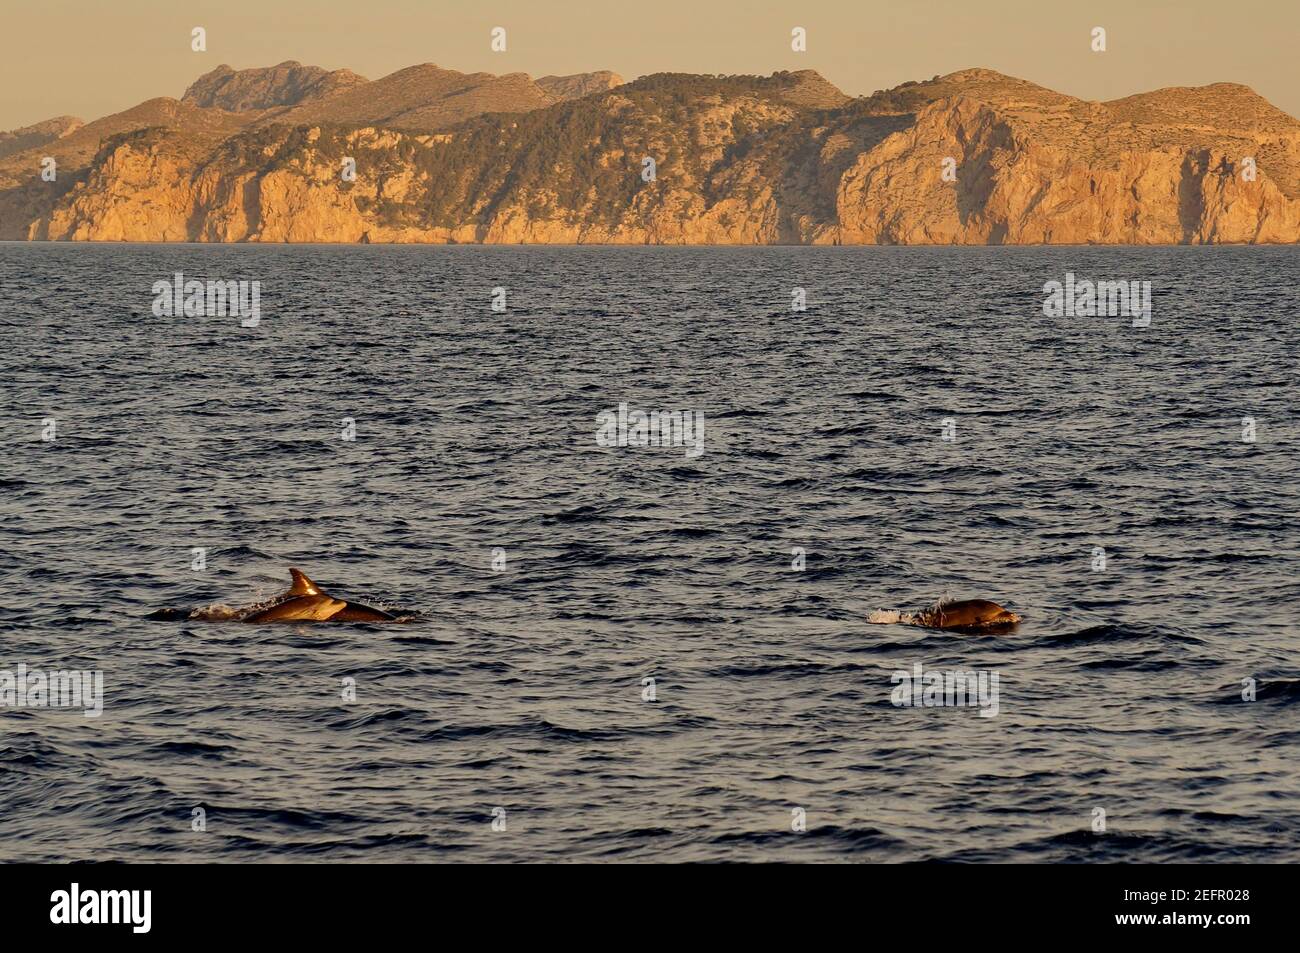 Wild dolphins swimming in the Mediterranean Sea close to the coast of Mallorca island on the sunny day Stock Photo